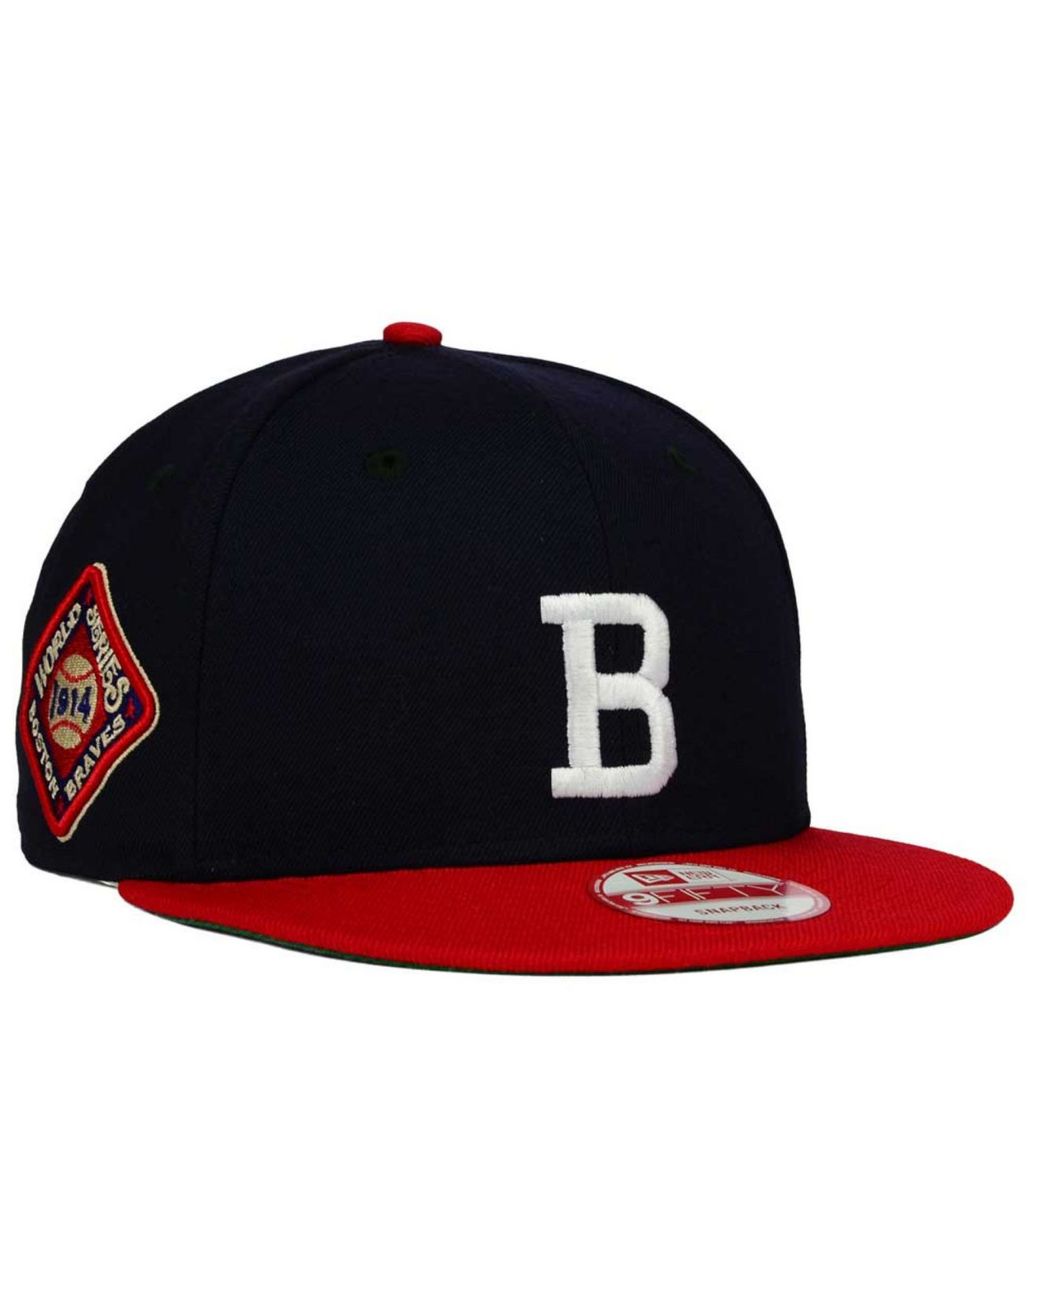 New Era 9Fifty Cooperstown Collection Boston Braves Baseball Hat - Snapback